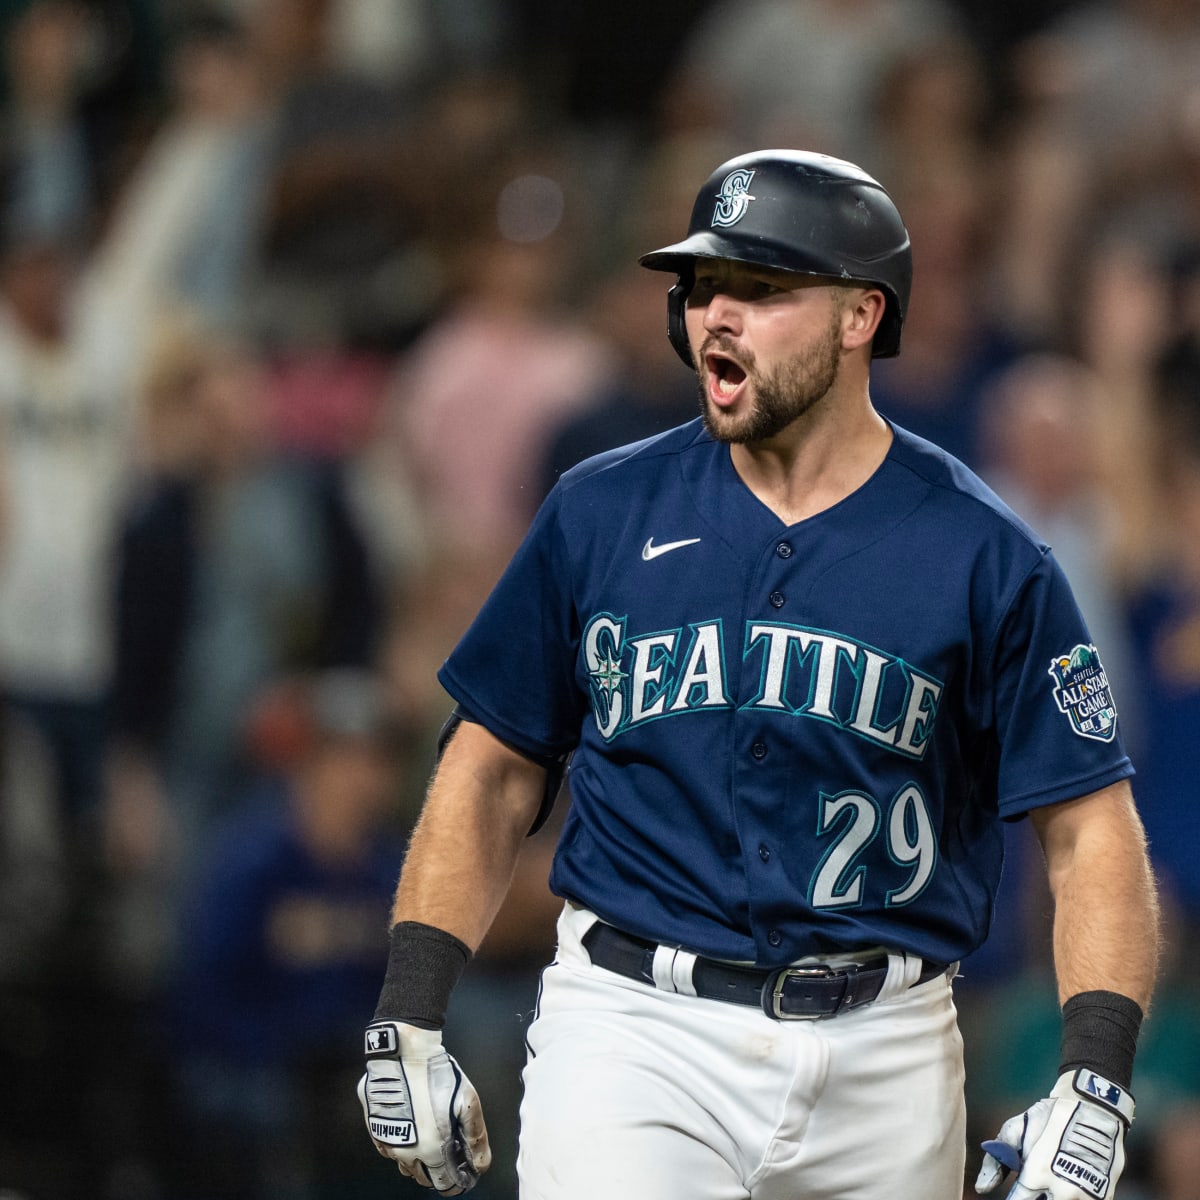 Catcher Cal Raleigh Makes Seattle Mariners History With Latest Home Run -  Fastball